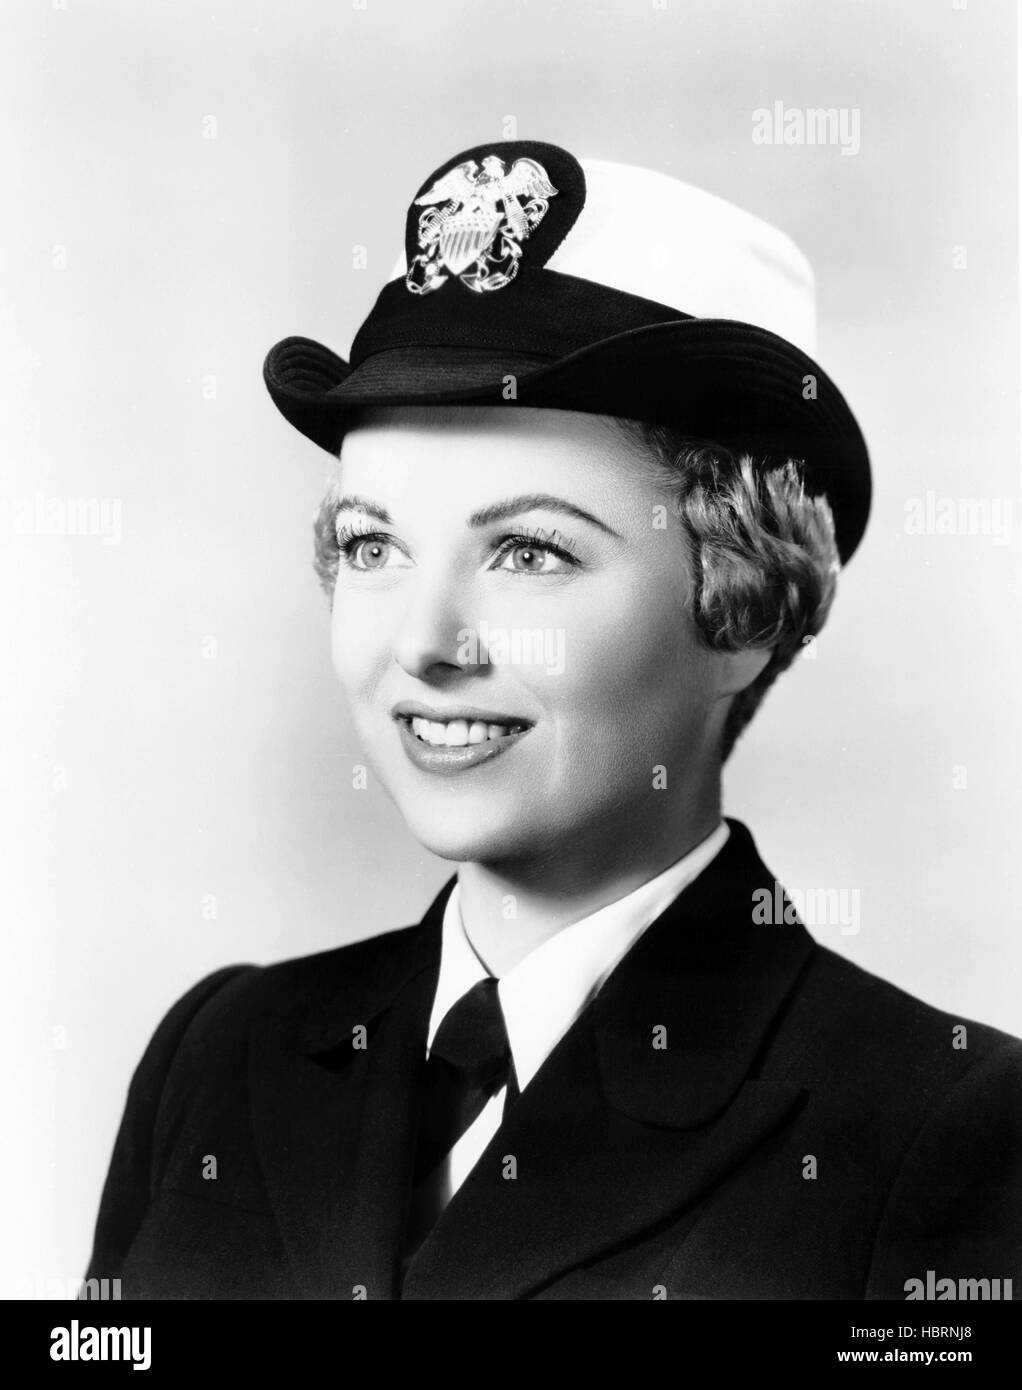 FRANCIS IN THE NAVY, Martha Hyer, 1955 Stock Photo - Alamy